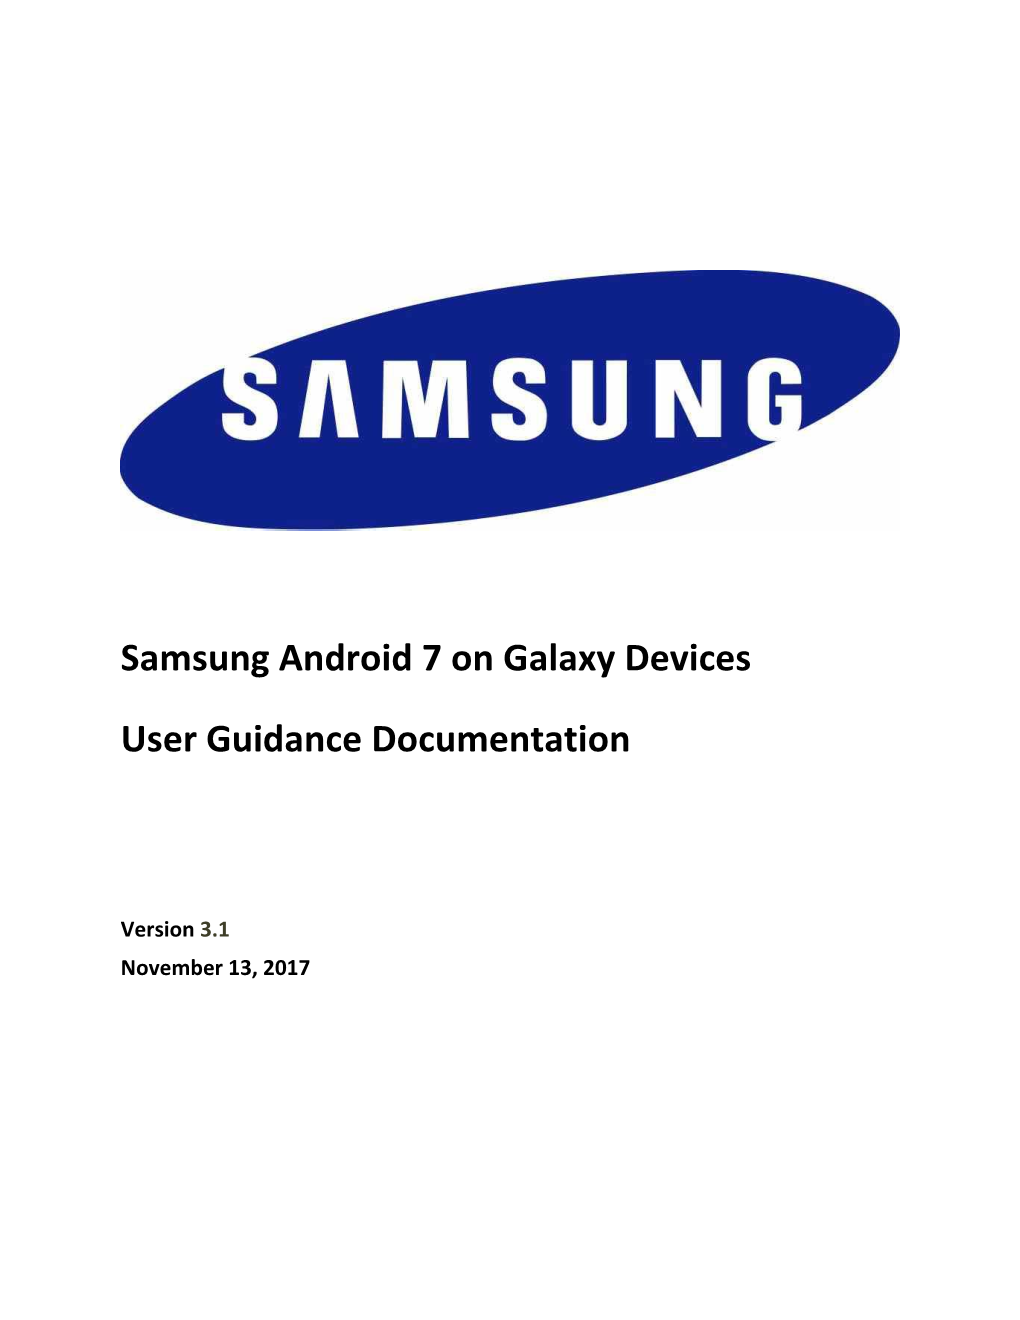 Samsung Android 7 on Galaxy Devices User Guidance Documentation